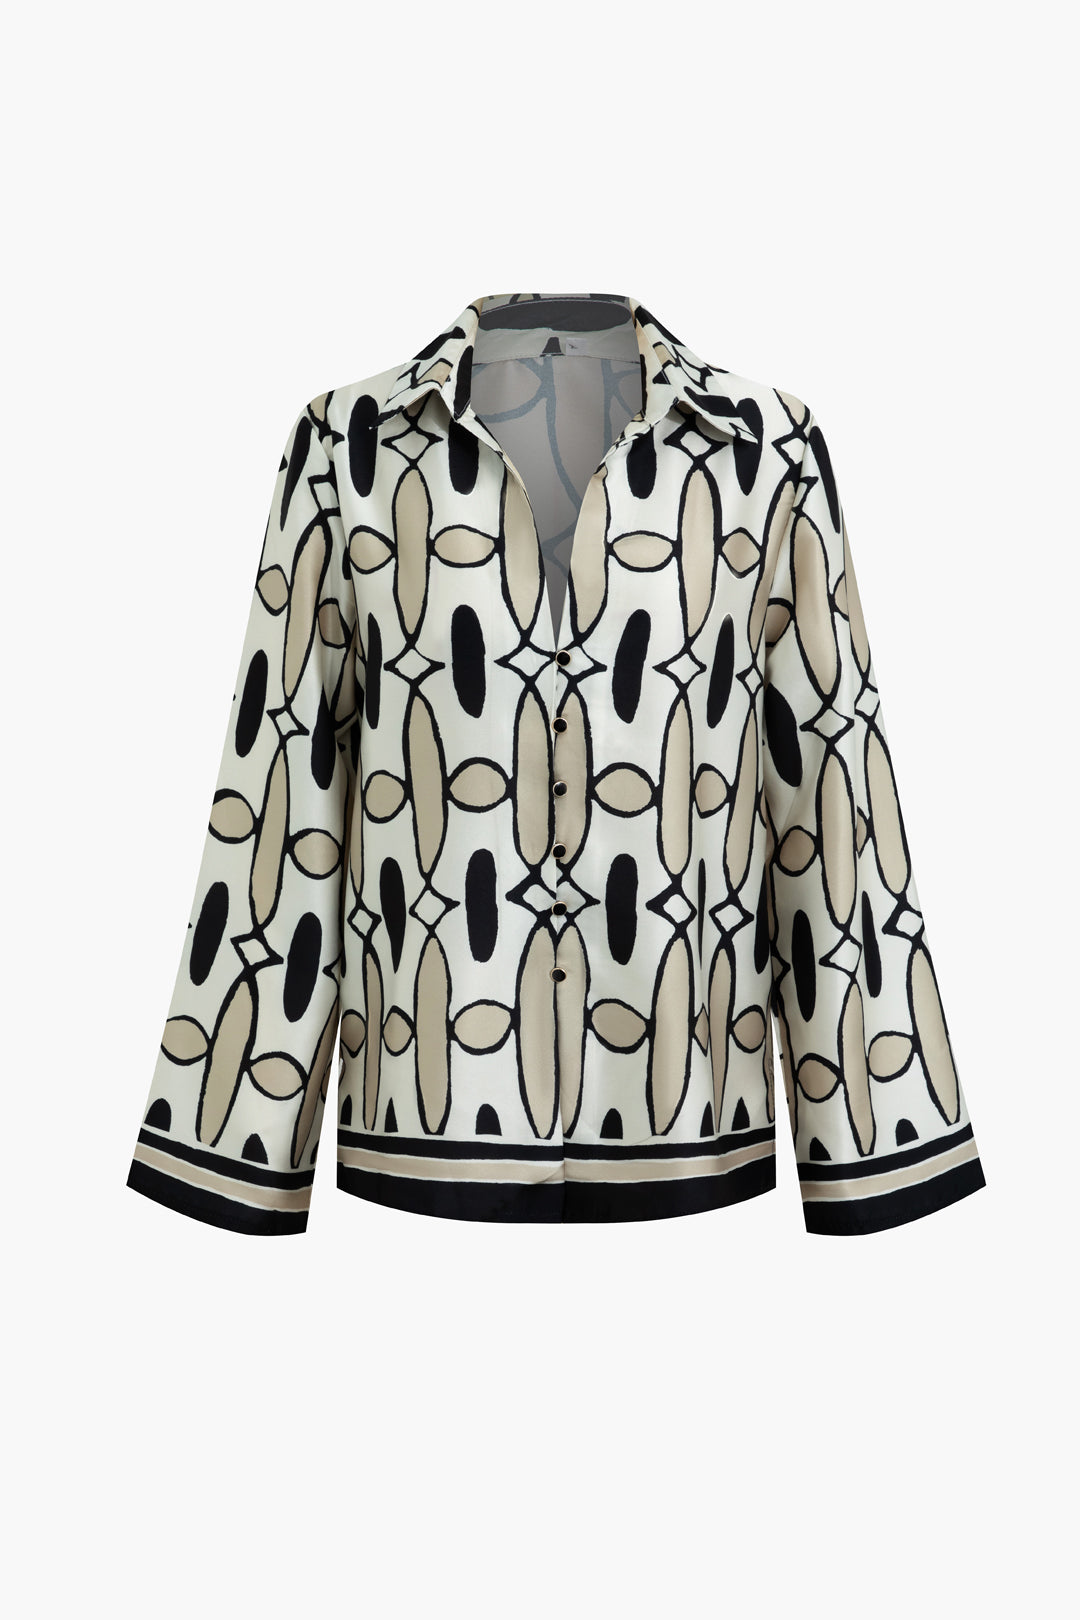 Abstract Chain-Link Print Button-Up Long-Sleeve Shirt